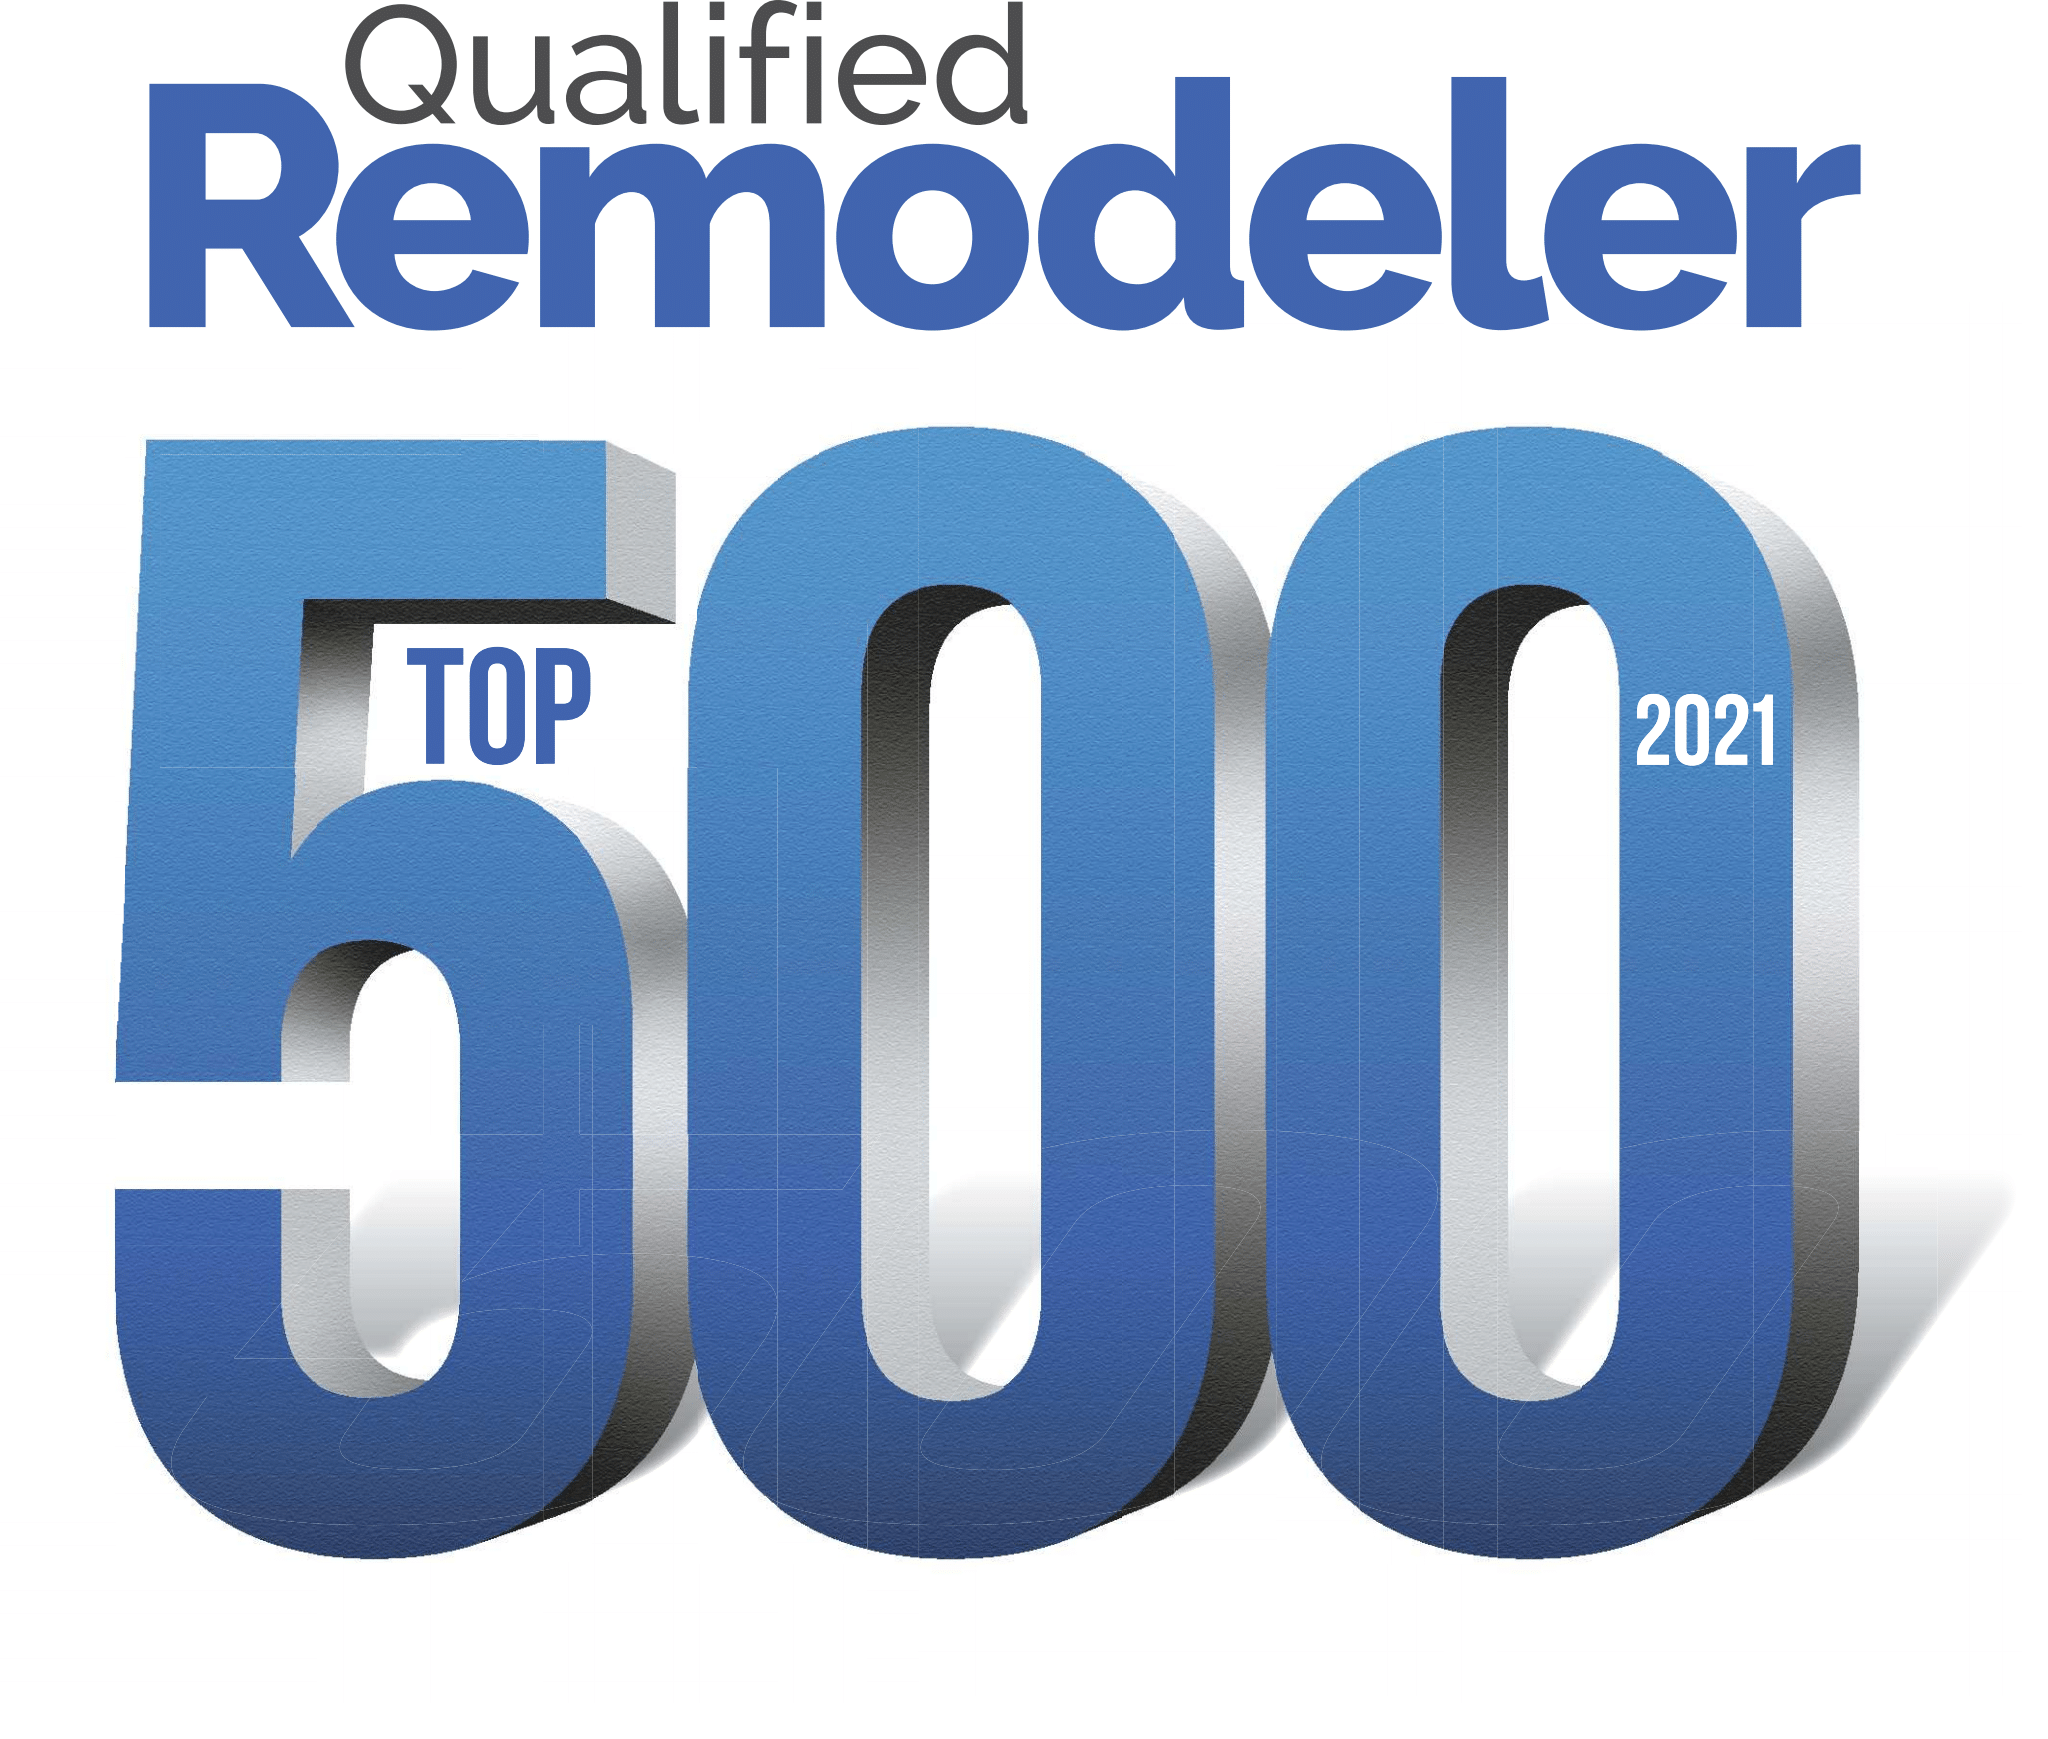 Qualified Remodeler TOP 500 in 2021